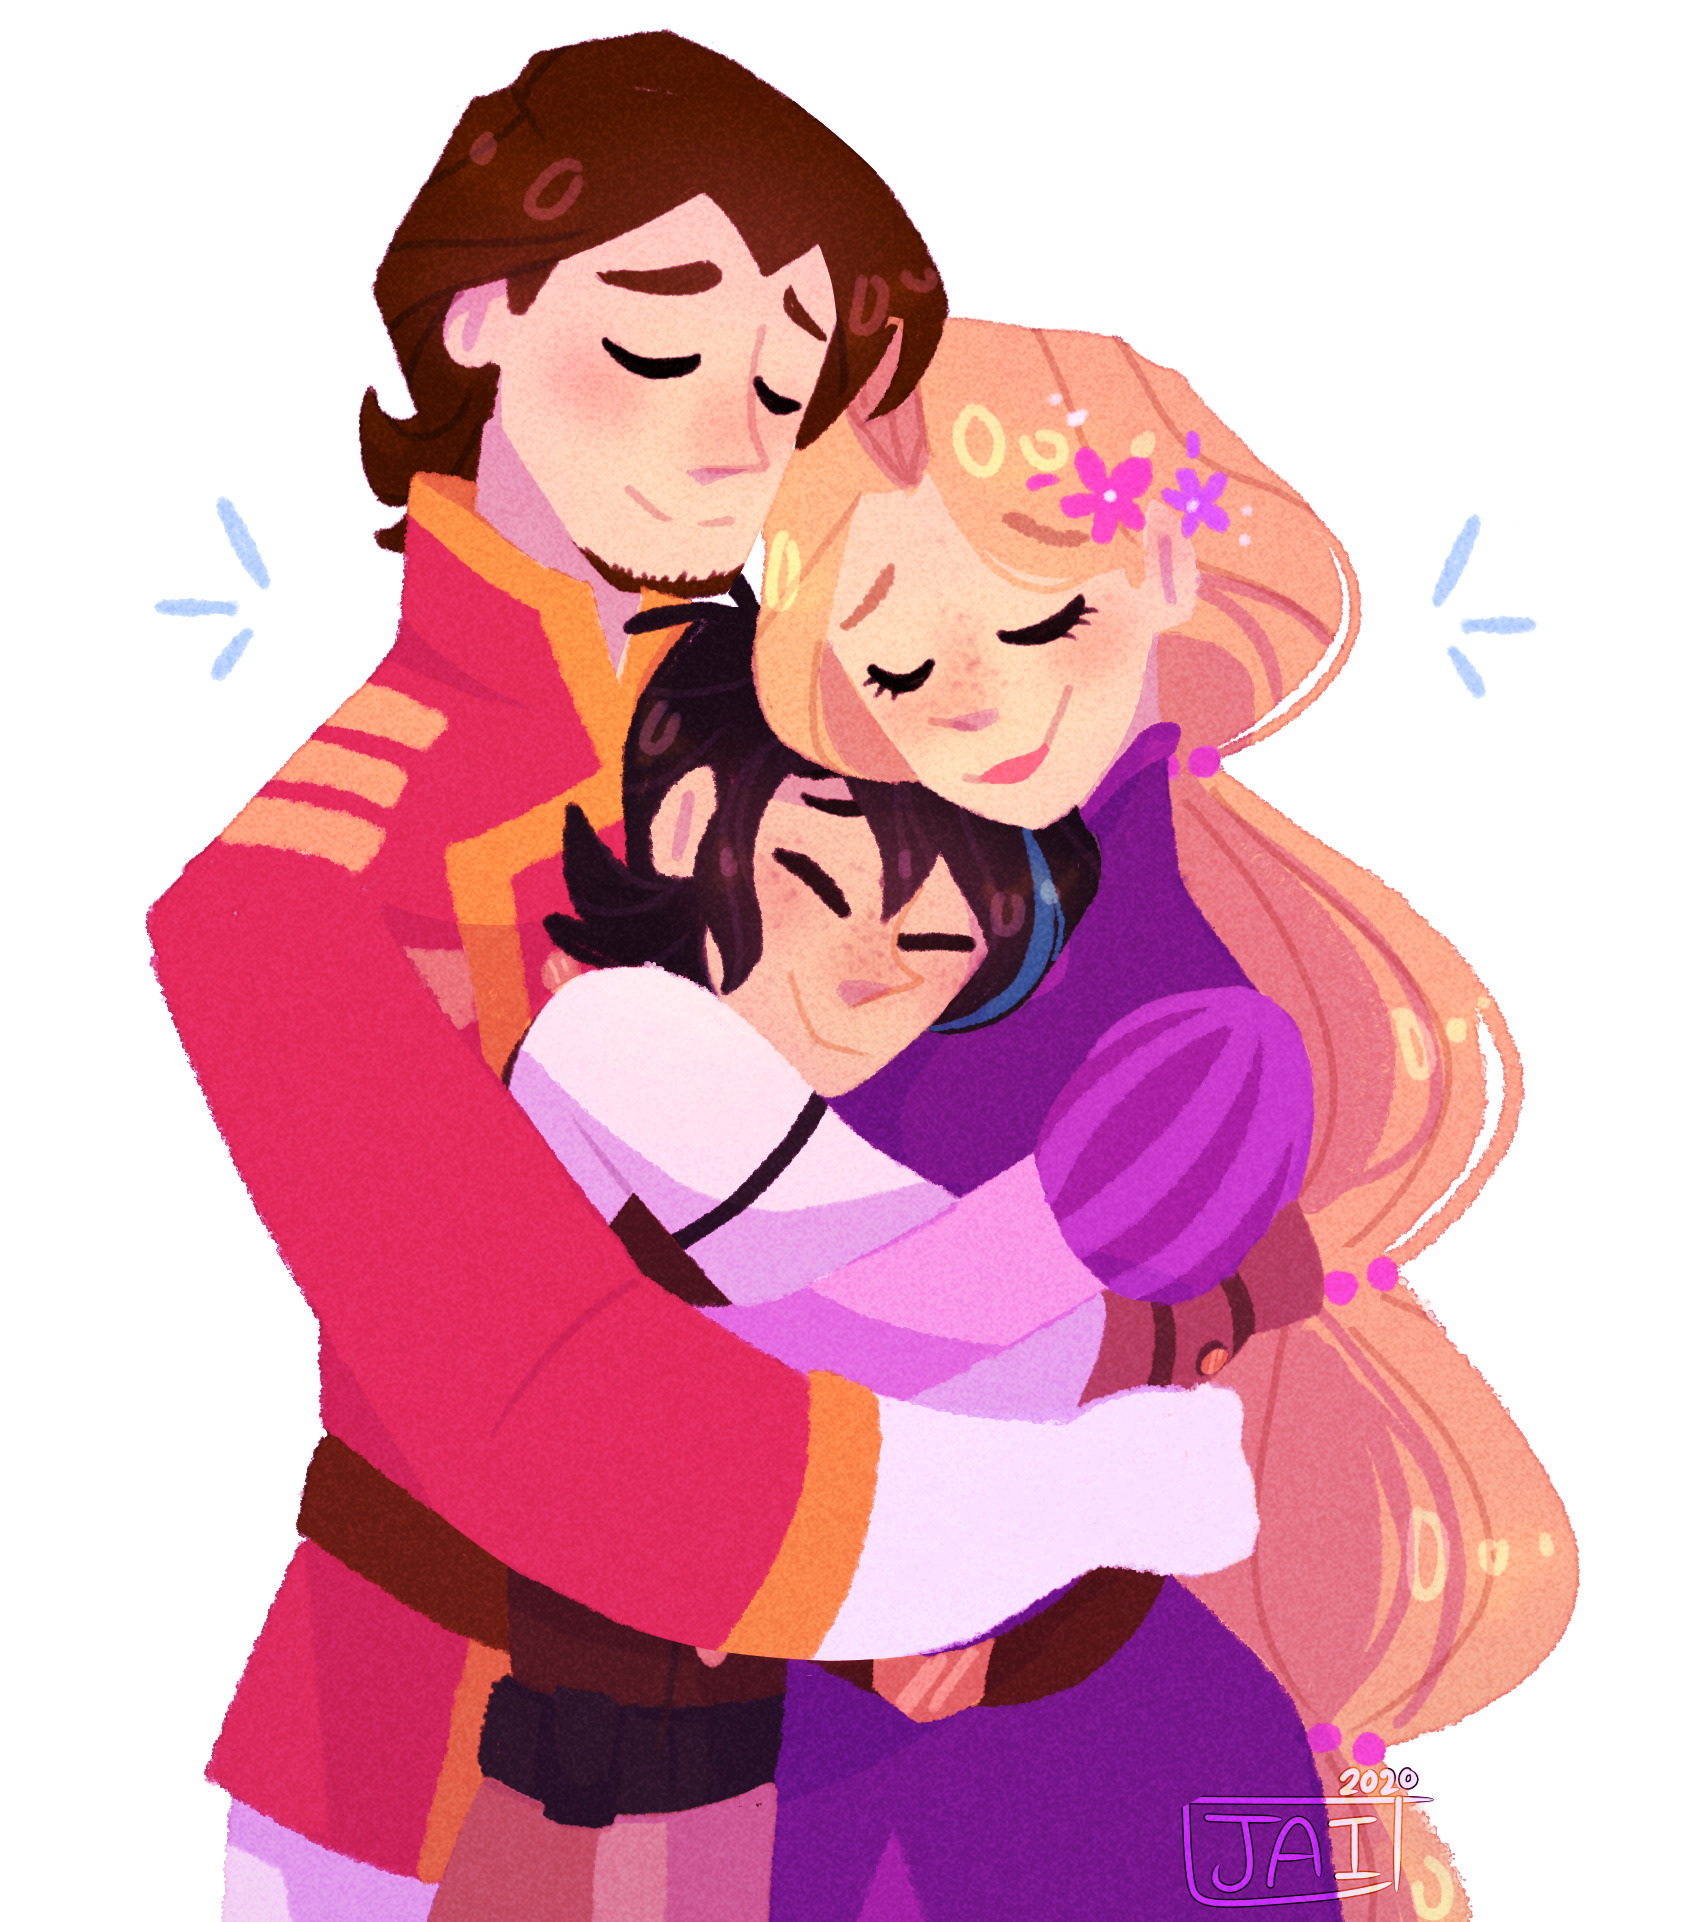 Tangled: The Series Art by jxitrash